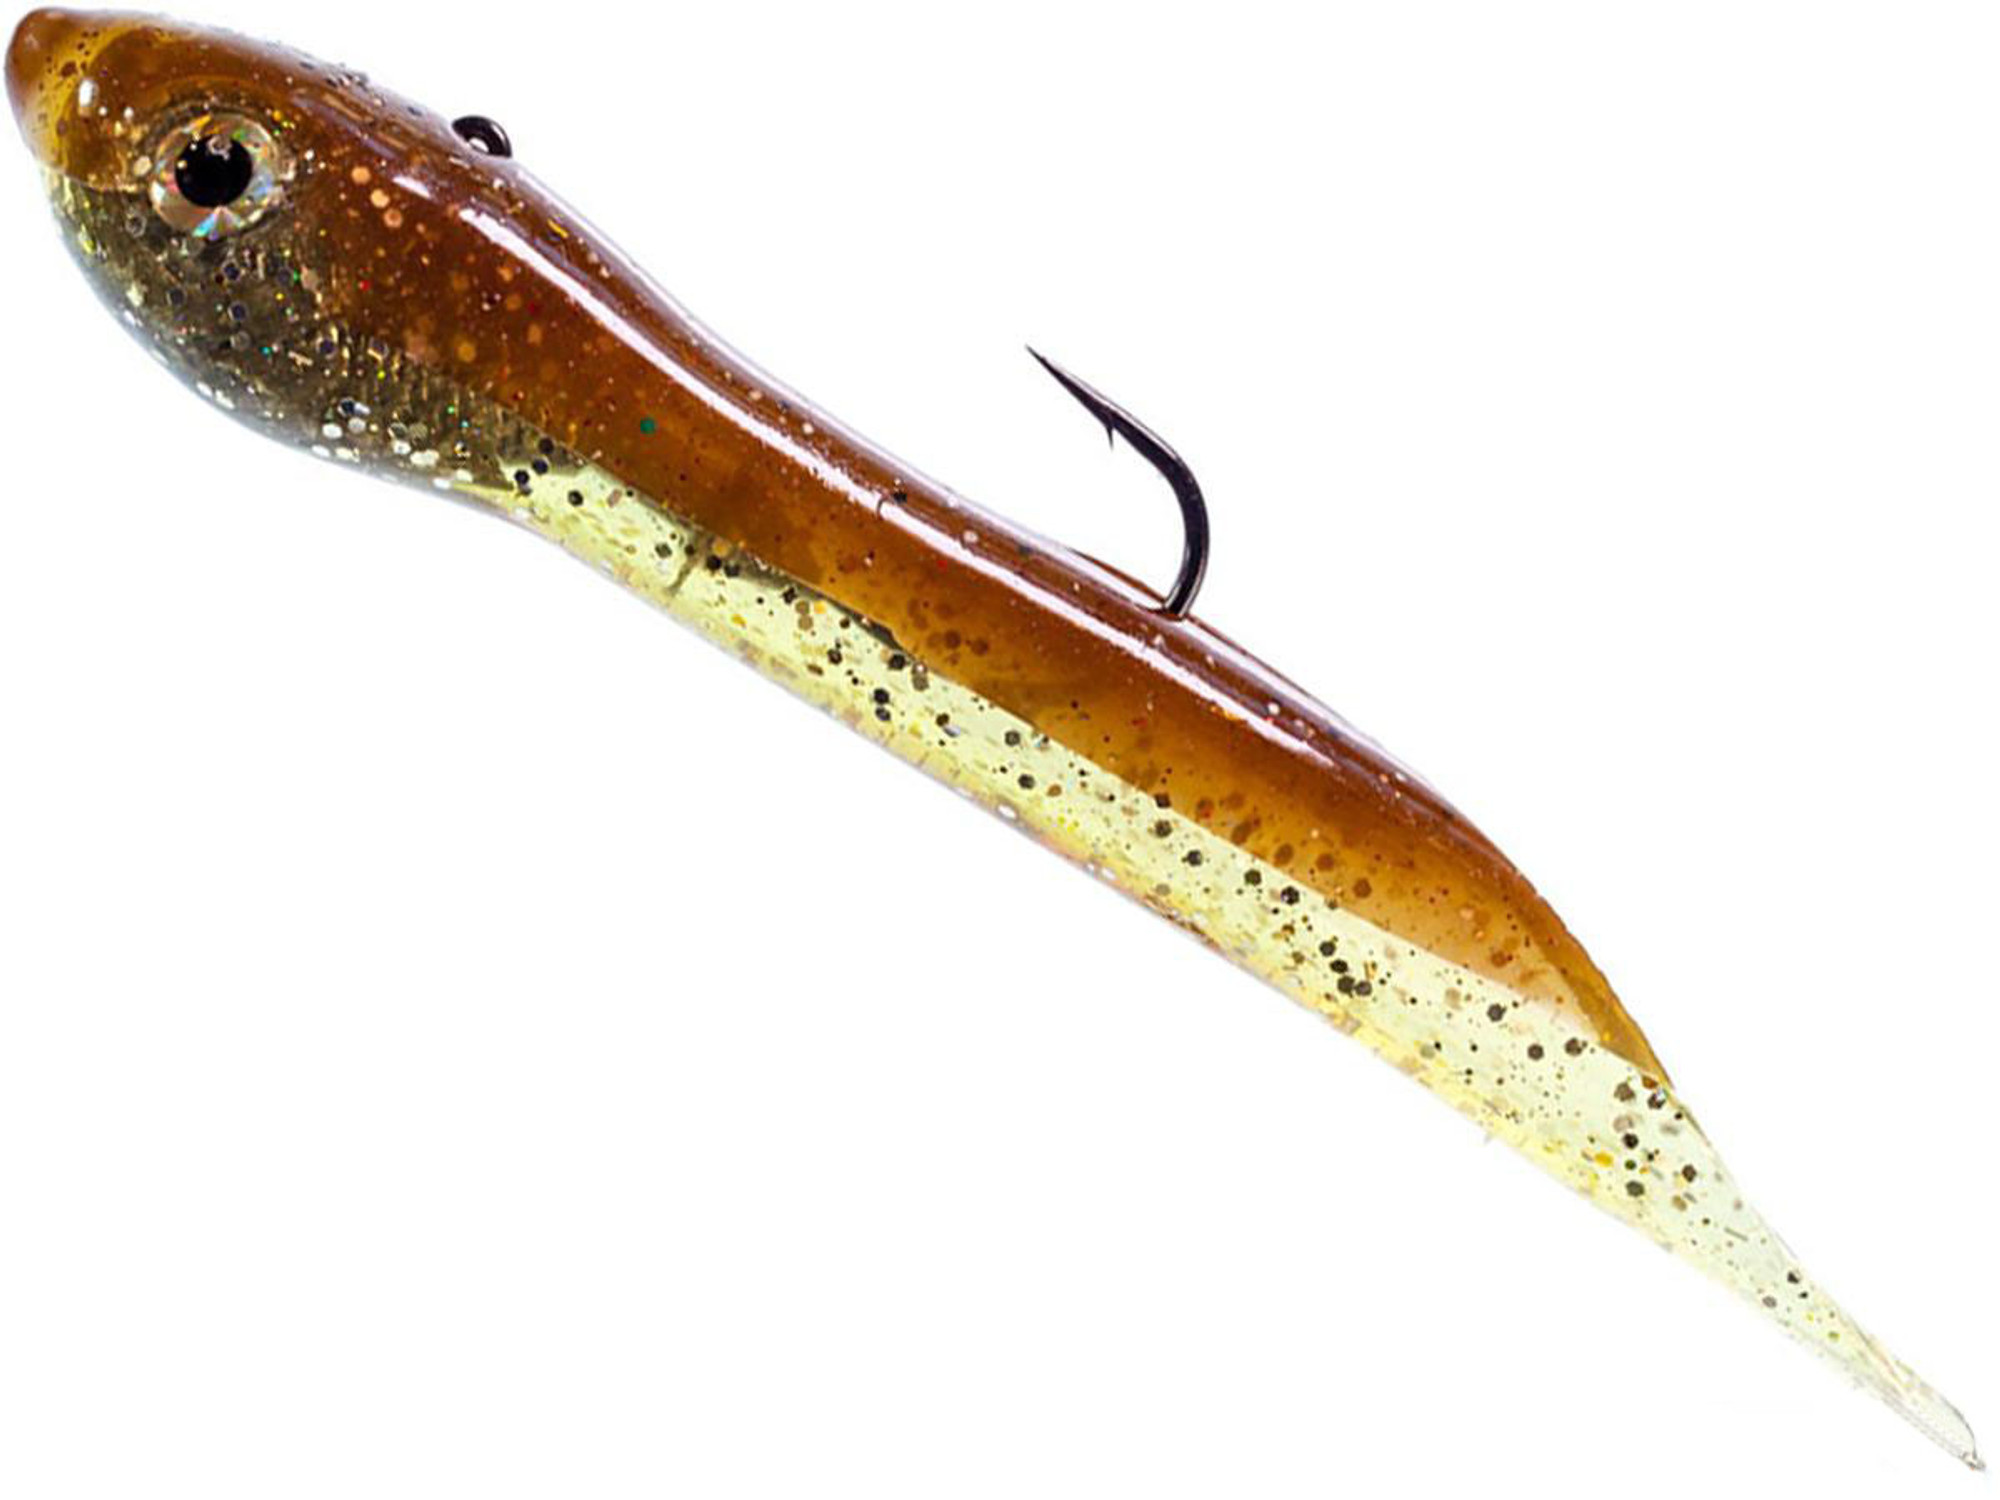 Hook Up Baits Handcrafted Soft Fishing Jigs - Brown Gold / 8" / 3 oz